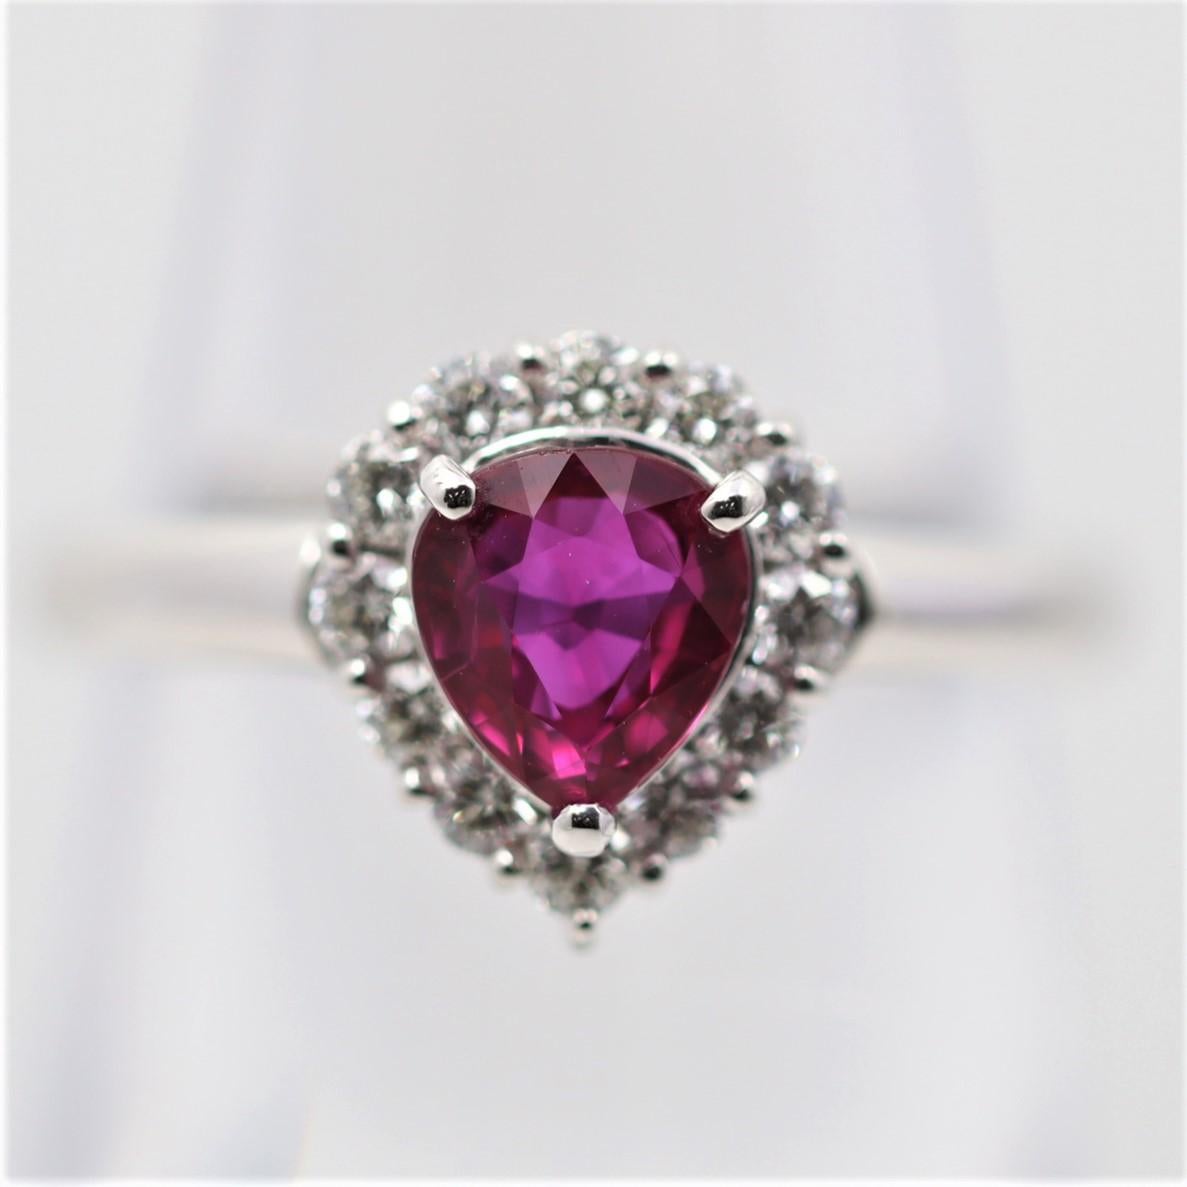 A fine example of a classic Burmese ruby. Weighing in at 1.11 carats it has a rich and vibrant, slightly purplish-red color. It is complemented by 0.33 carats of round brilliant-cut diamonds which halo the ruby and add sparkle and brilliance to the